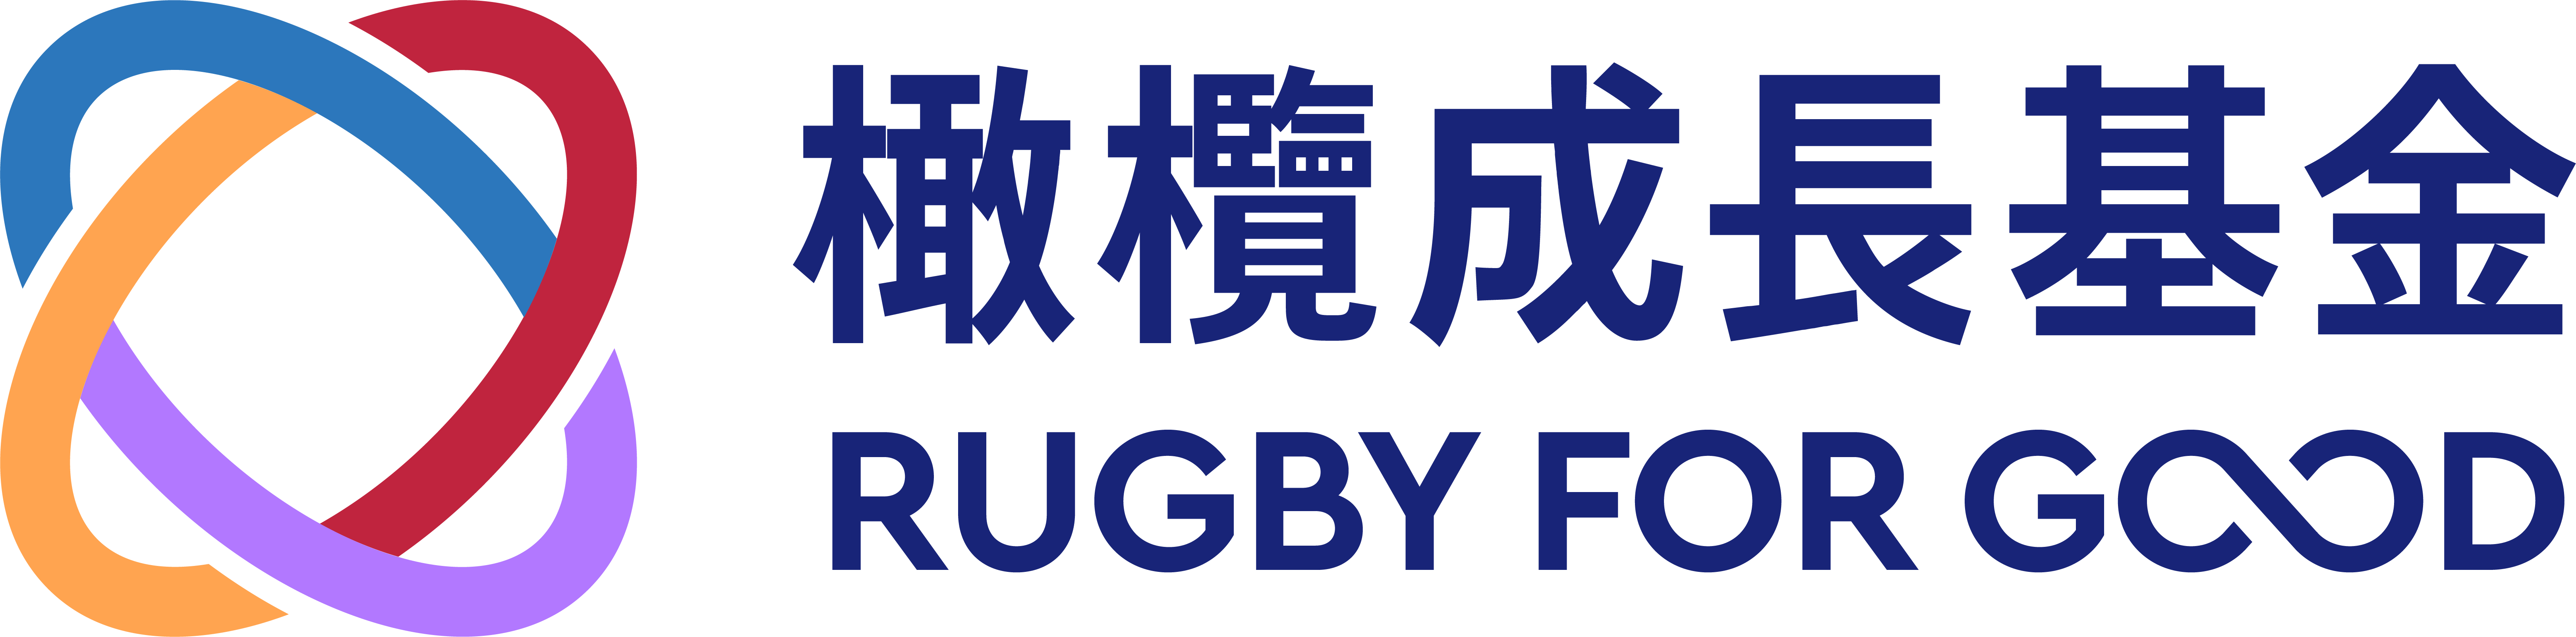 Rugby For Good logo